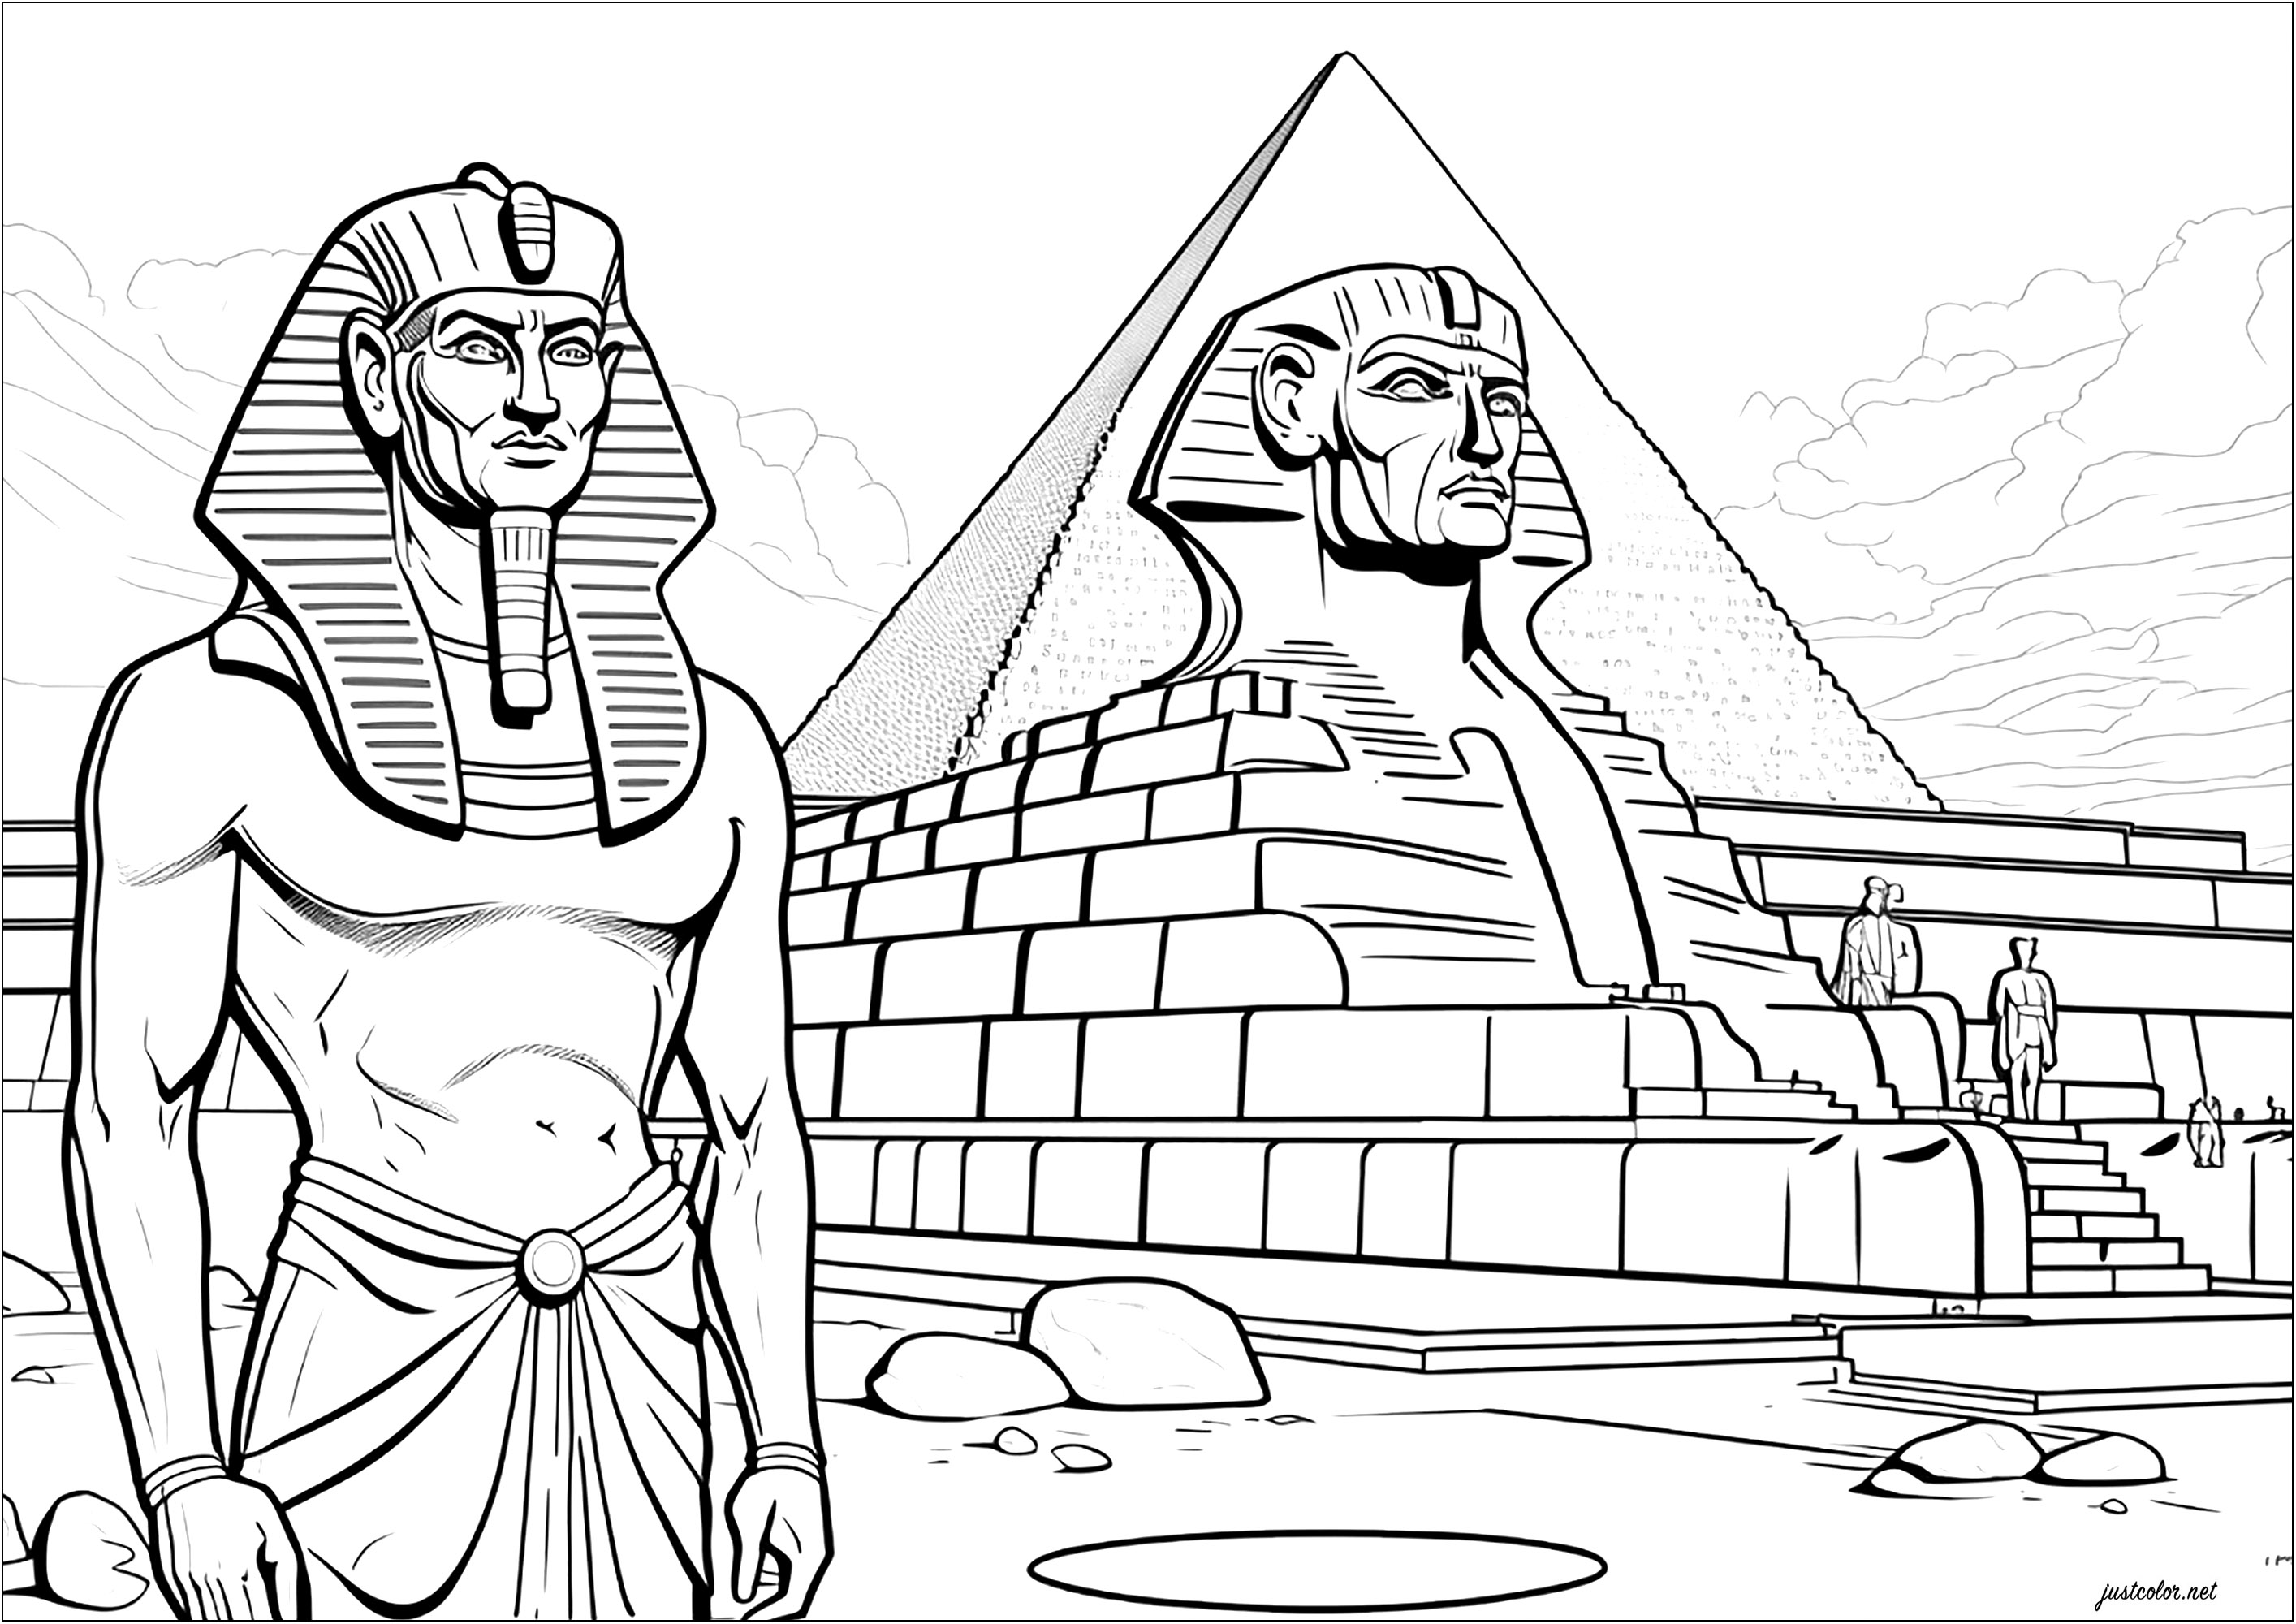 Pharaoh in front of sphynx and pyramid. This coloring page represents a pharaoh standing in front of a sphynx representing him and a large pyramid.
